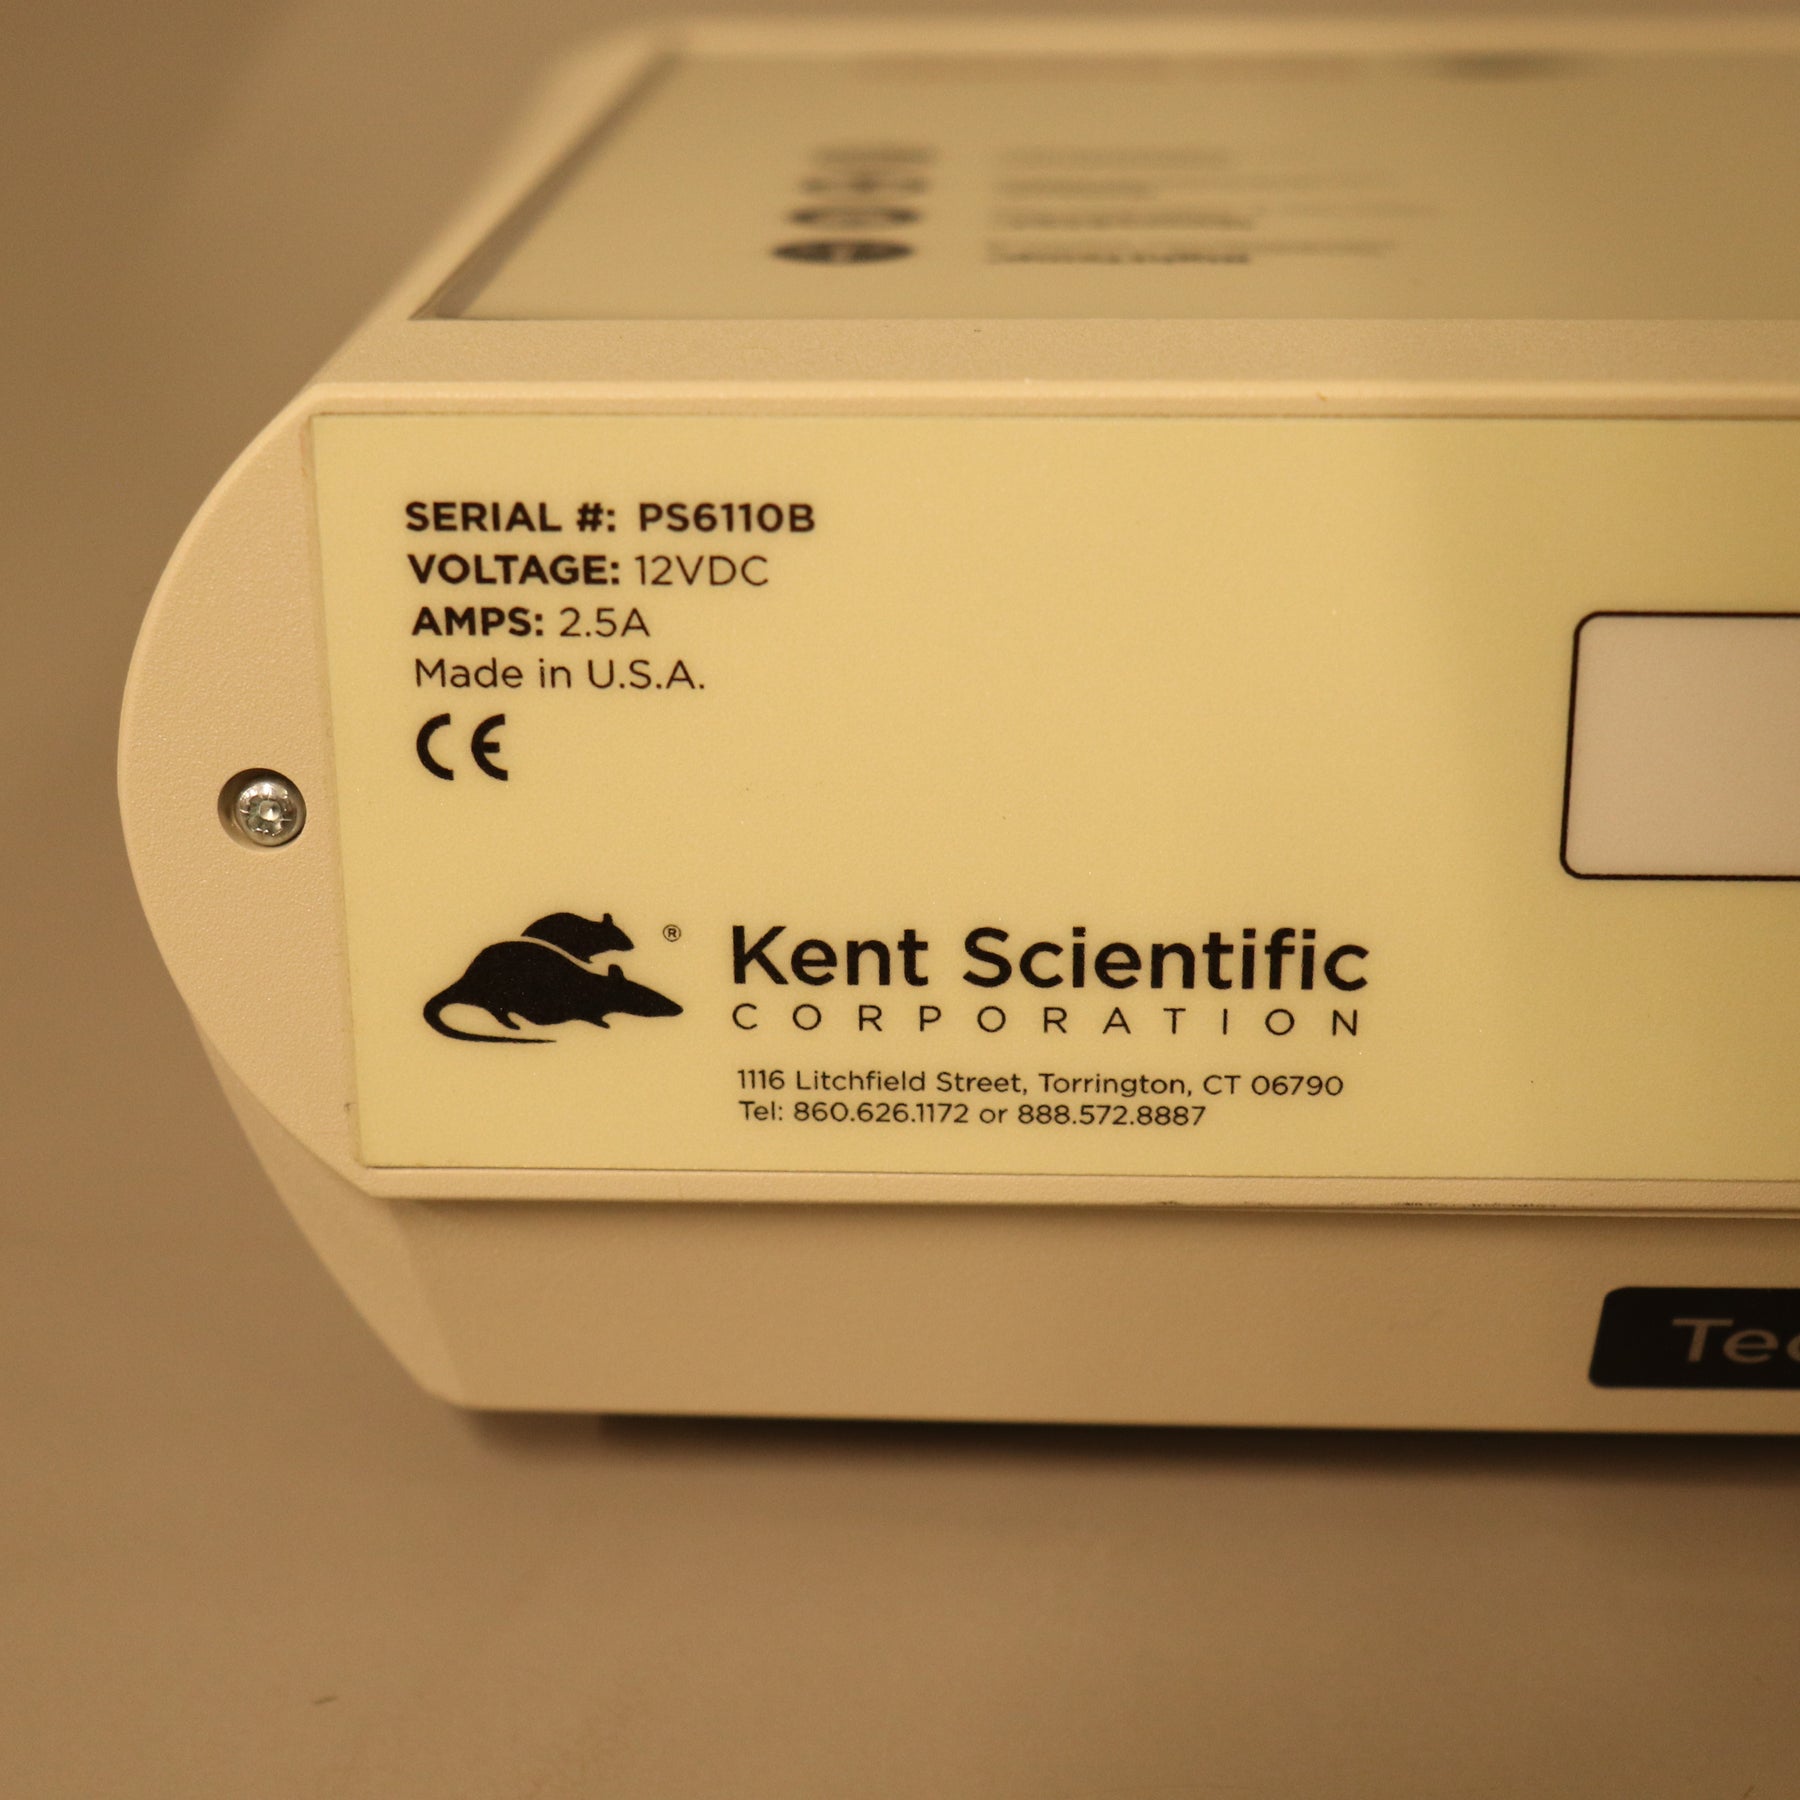 Kent Scientific PhysioSuite Module-Based System